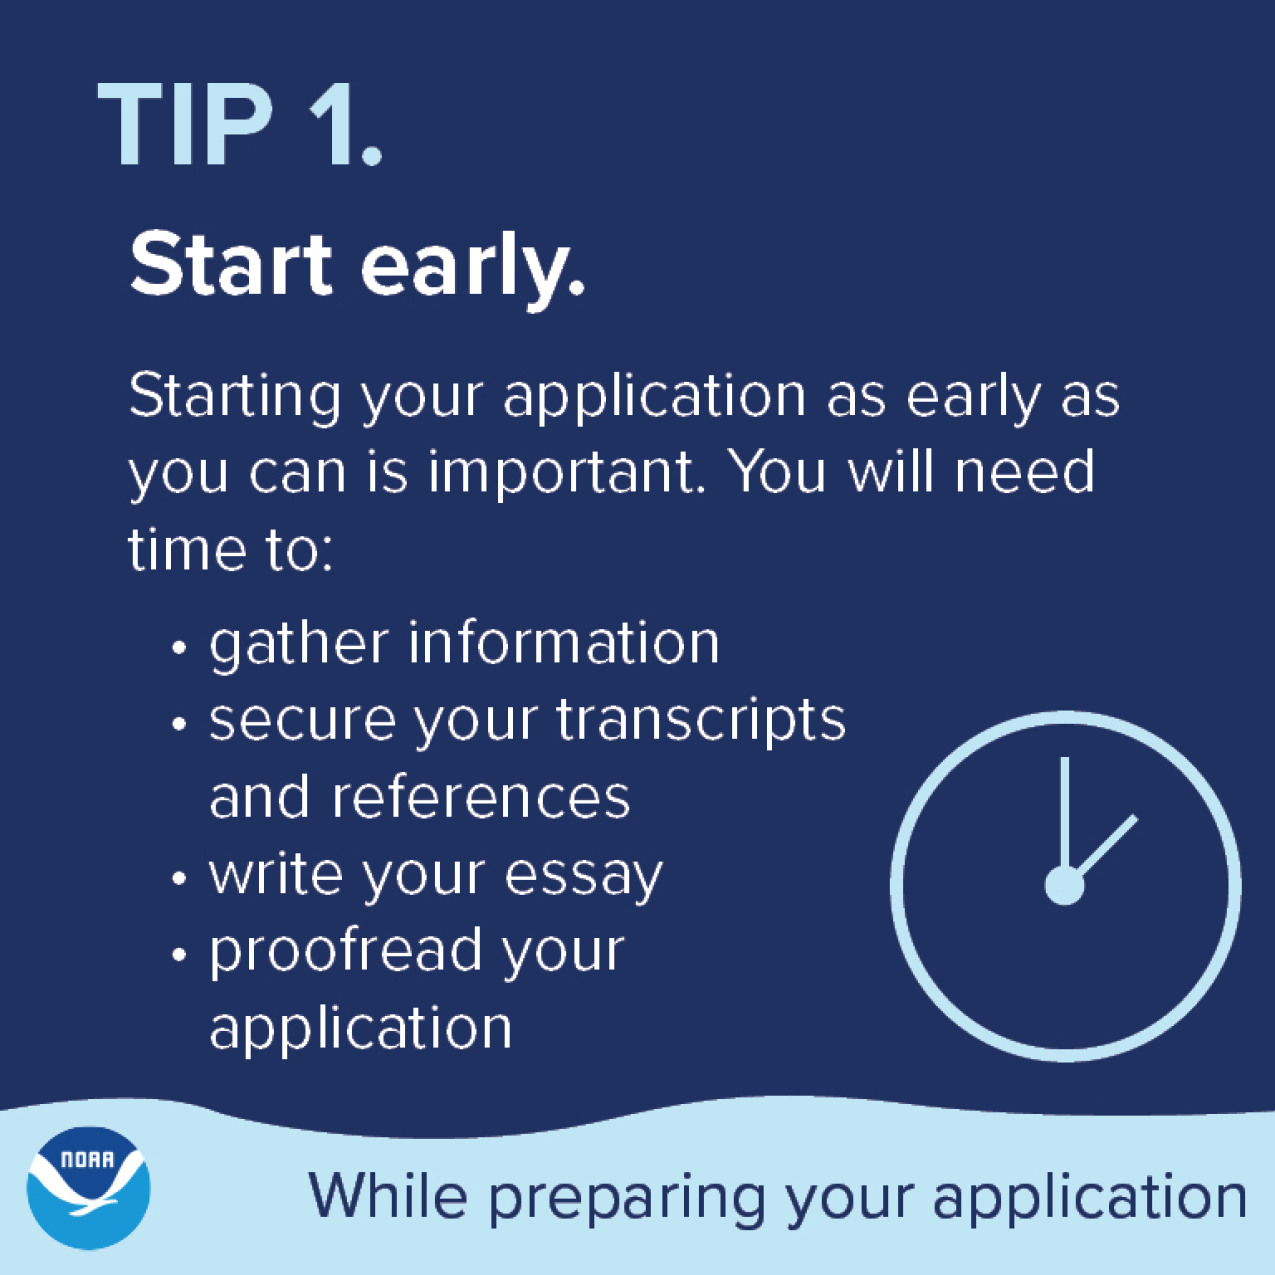 Tip 1. Start early. Starting your application as early as you can is important. You will need time to: gather information, secure your transcripts and references, write your essay, proofread your application